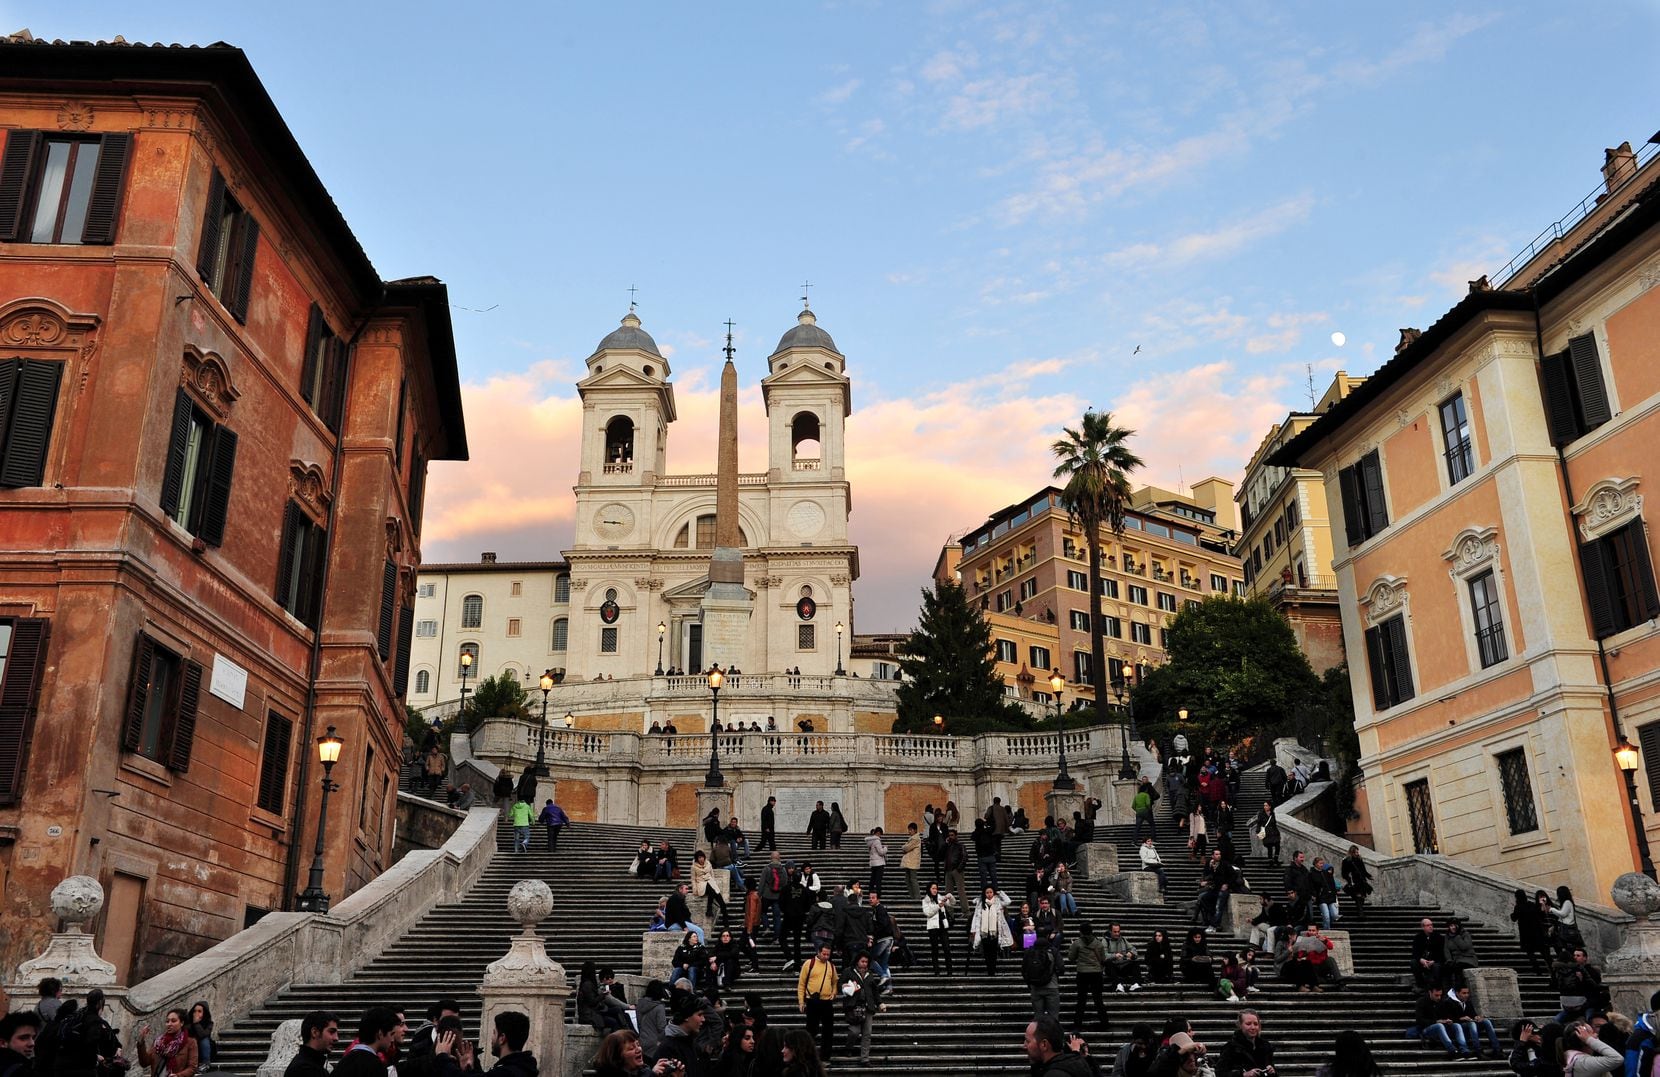 Overcrowding has become a problem on the Spanish Steps in Rome, with police even handing out...